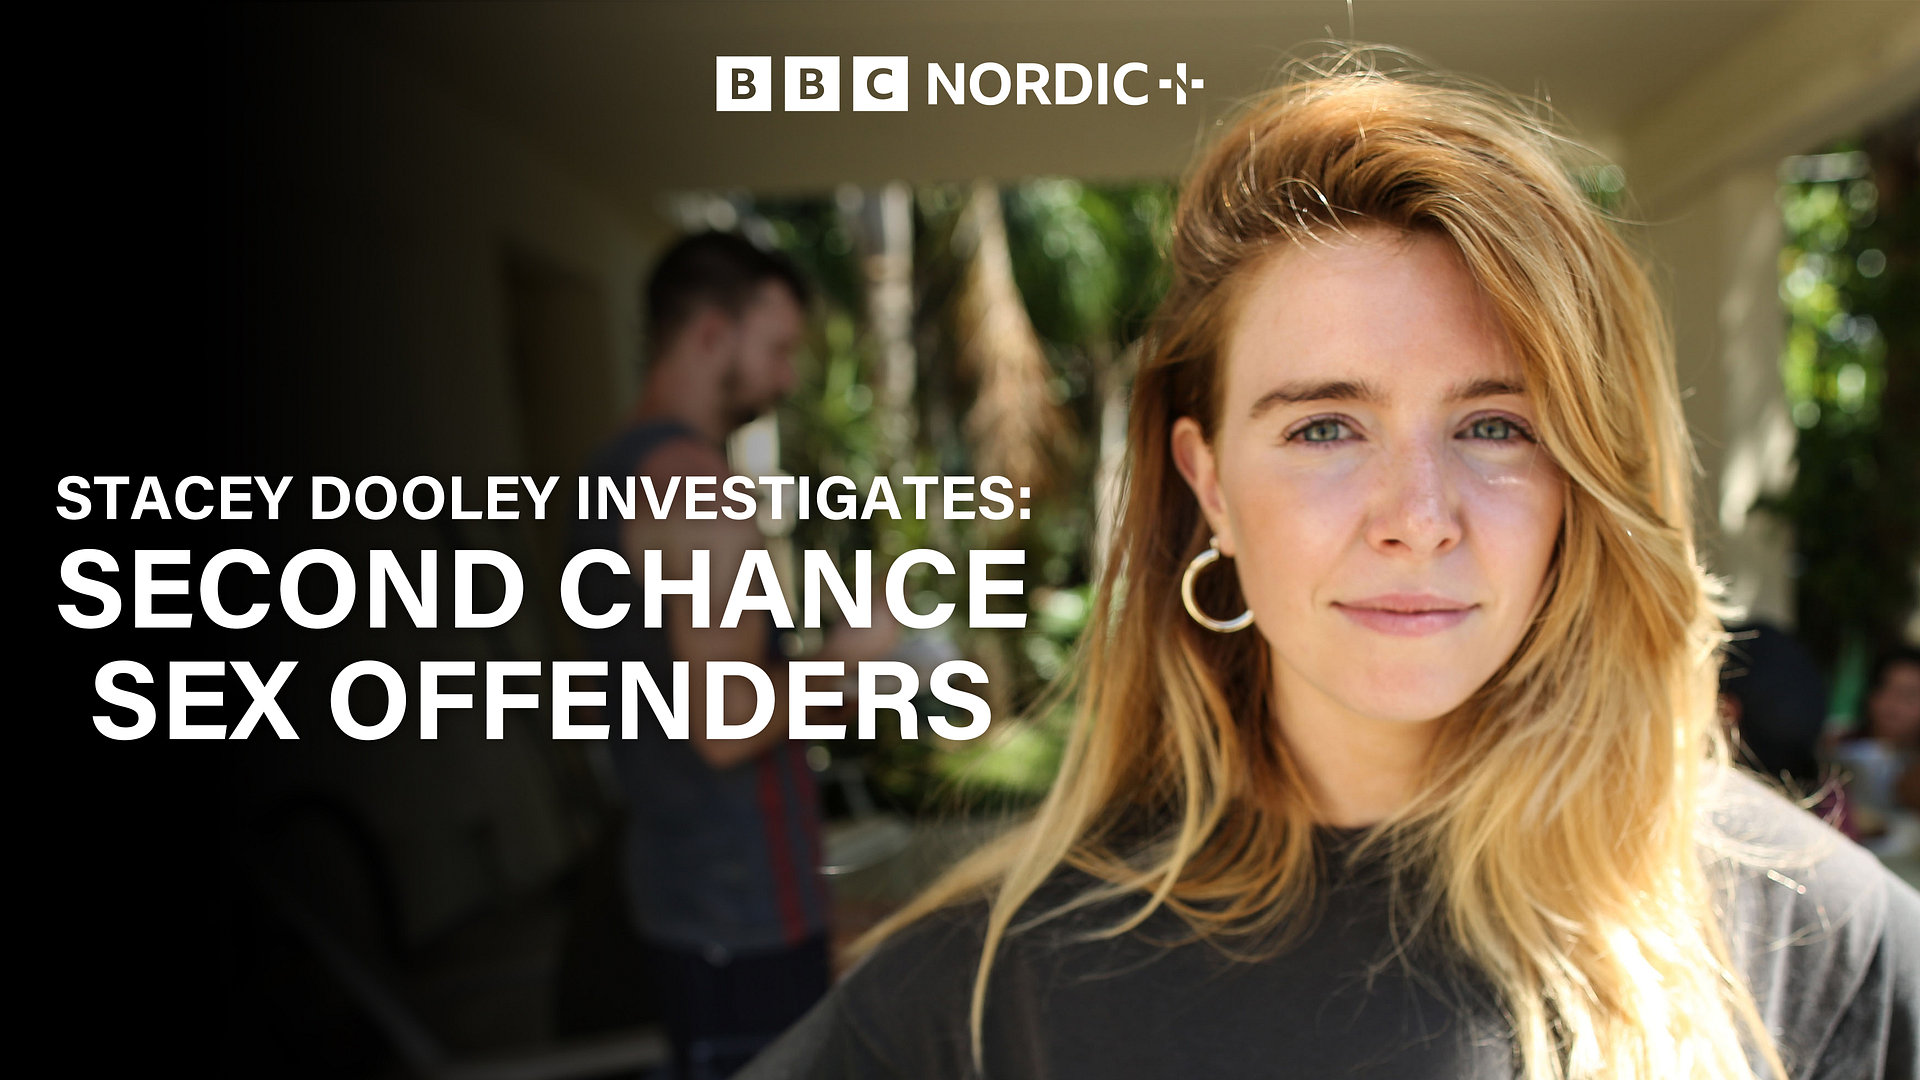 Stacey Dooley etterforsker: Second Chance Sex Offenders